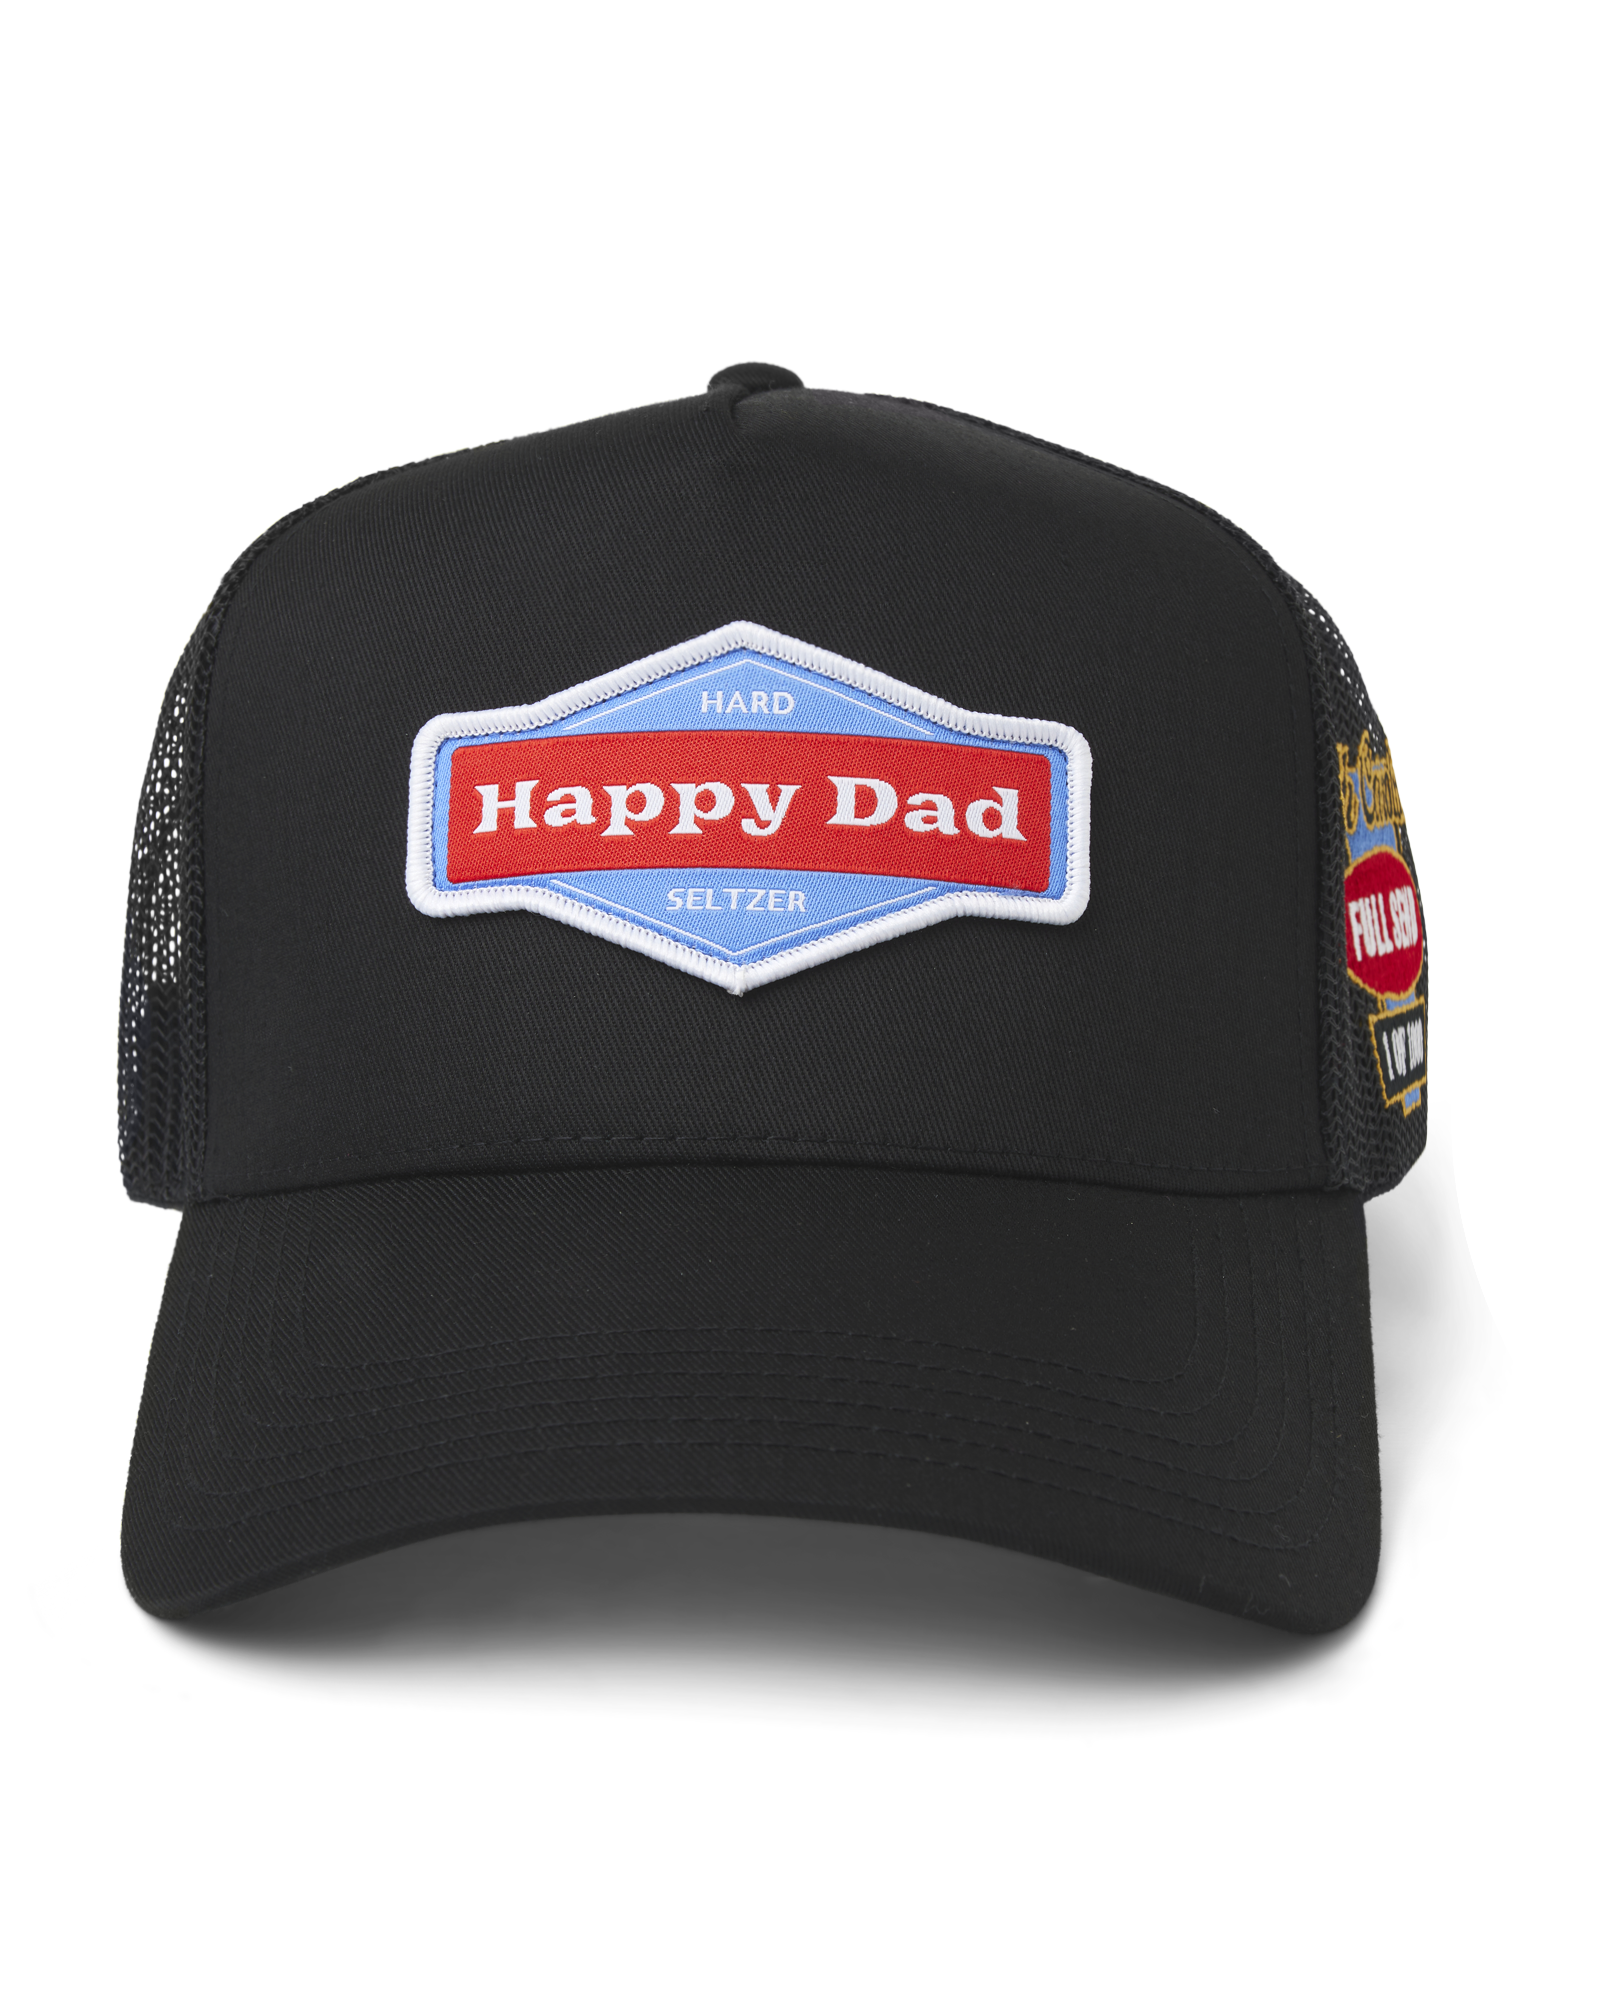 (Limited) Maryland - Happy Dad State Trucker Hat 1 of 1000